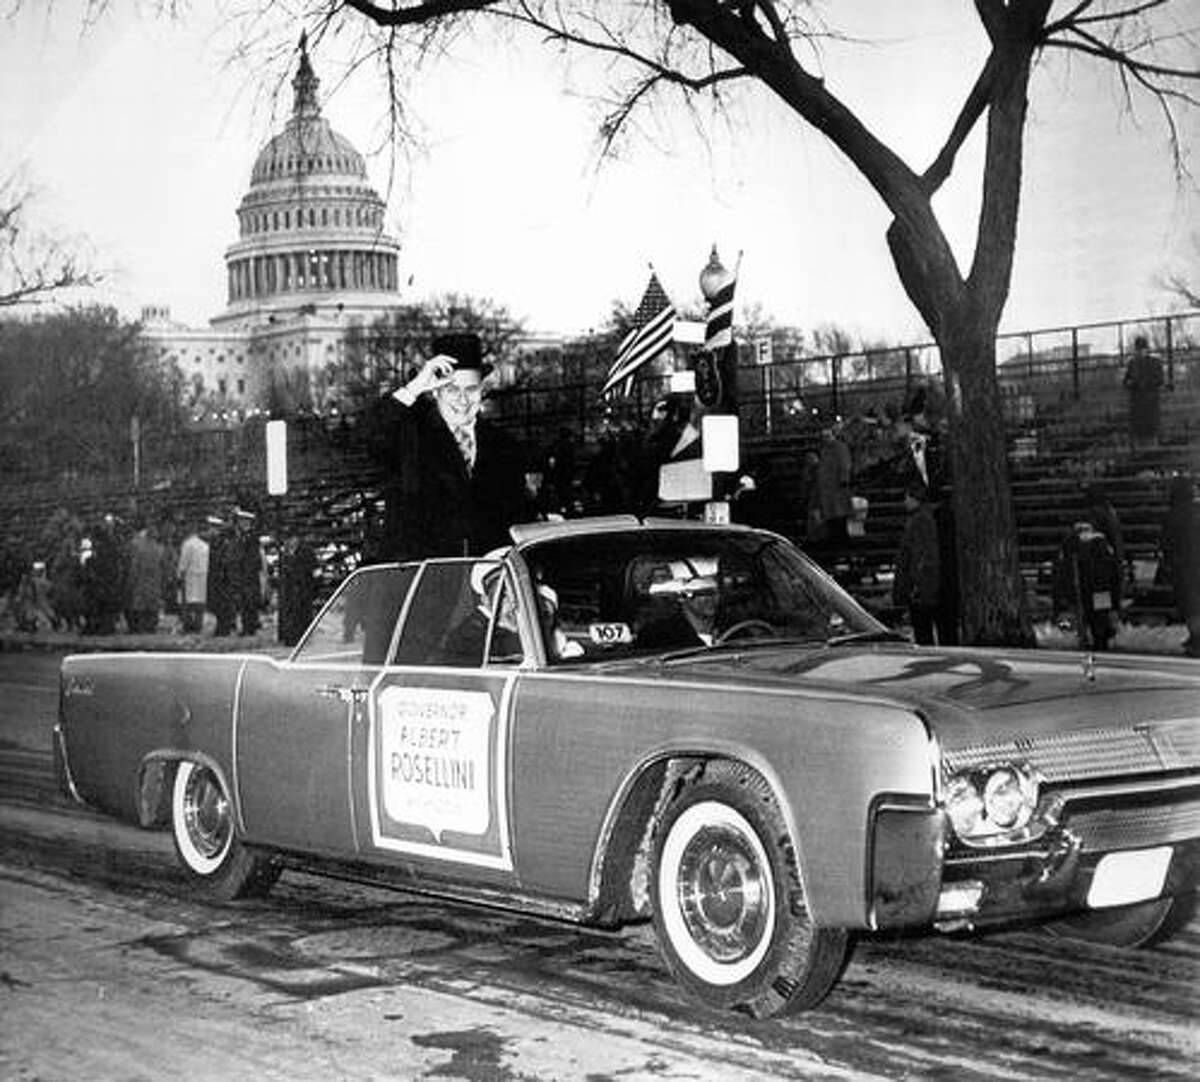 The January 1961 photo caption read: Smiling Gov. Albert Rosellini puts his hand to his heart as he acknowledges cheers from spectators along Constitution Avenue, part of inaugural parade route today.